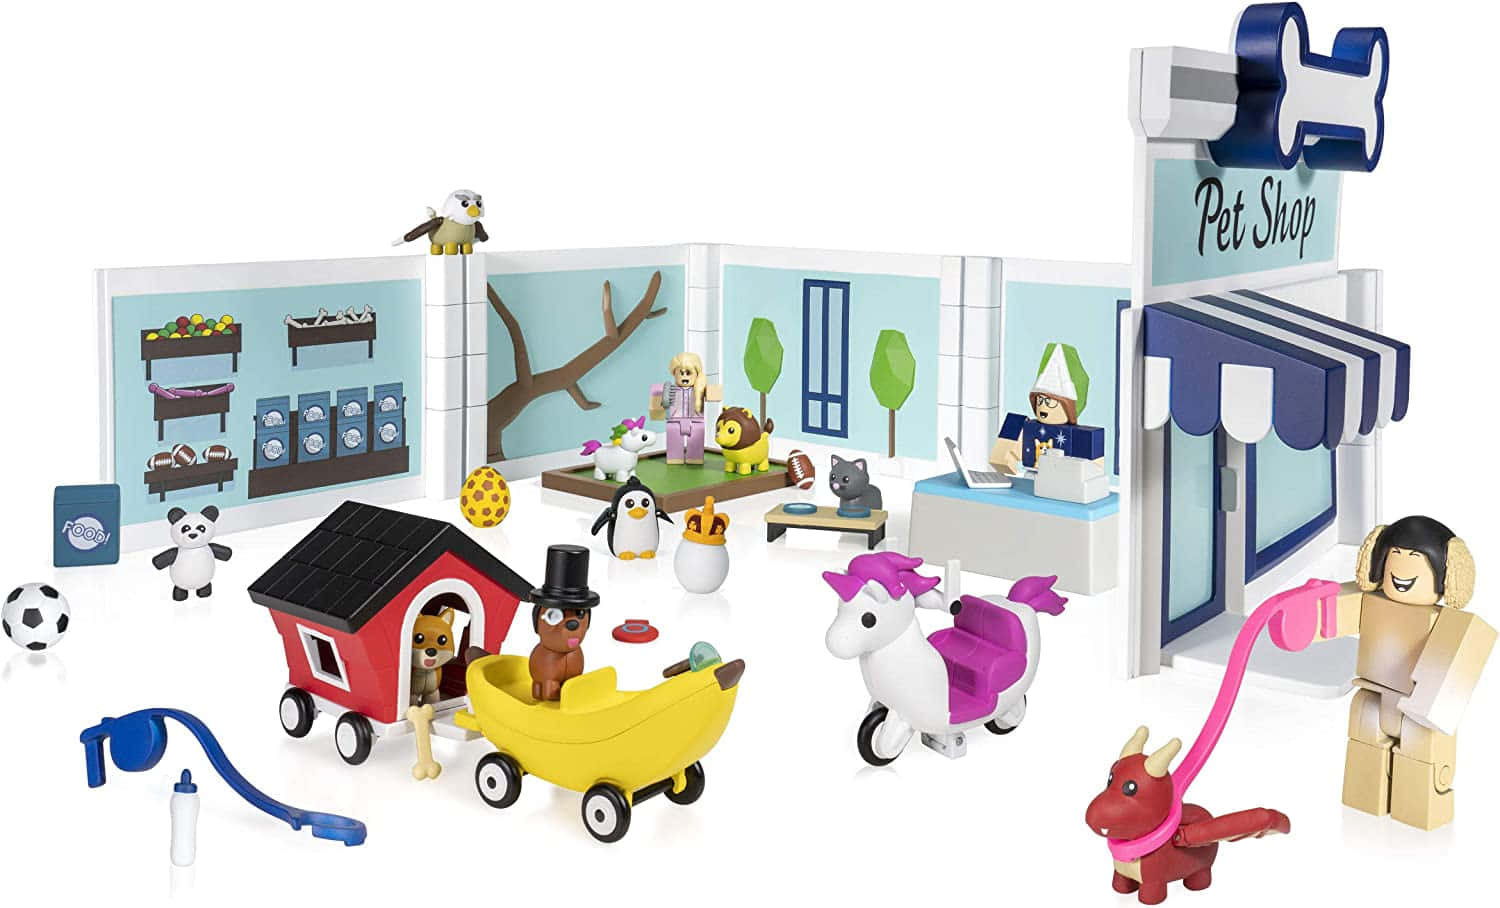 Adopt Me Pets Playset Toys Picture